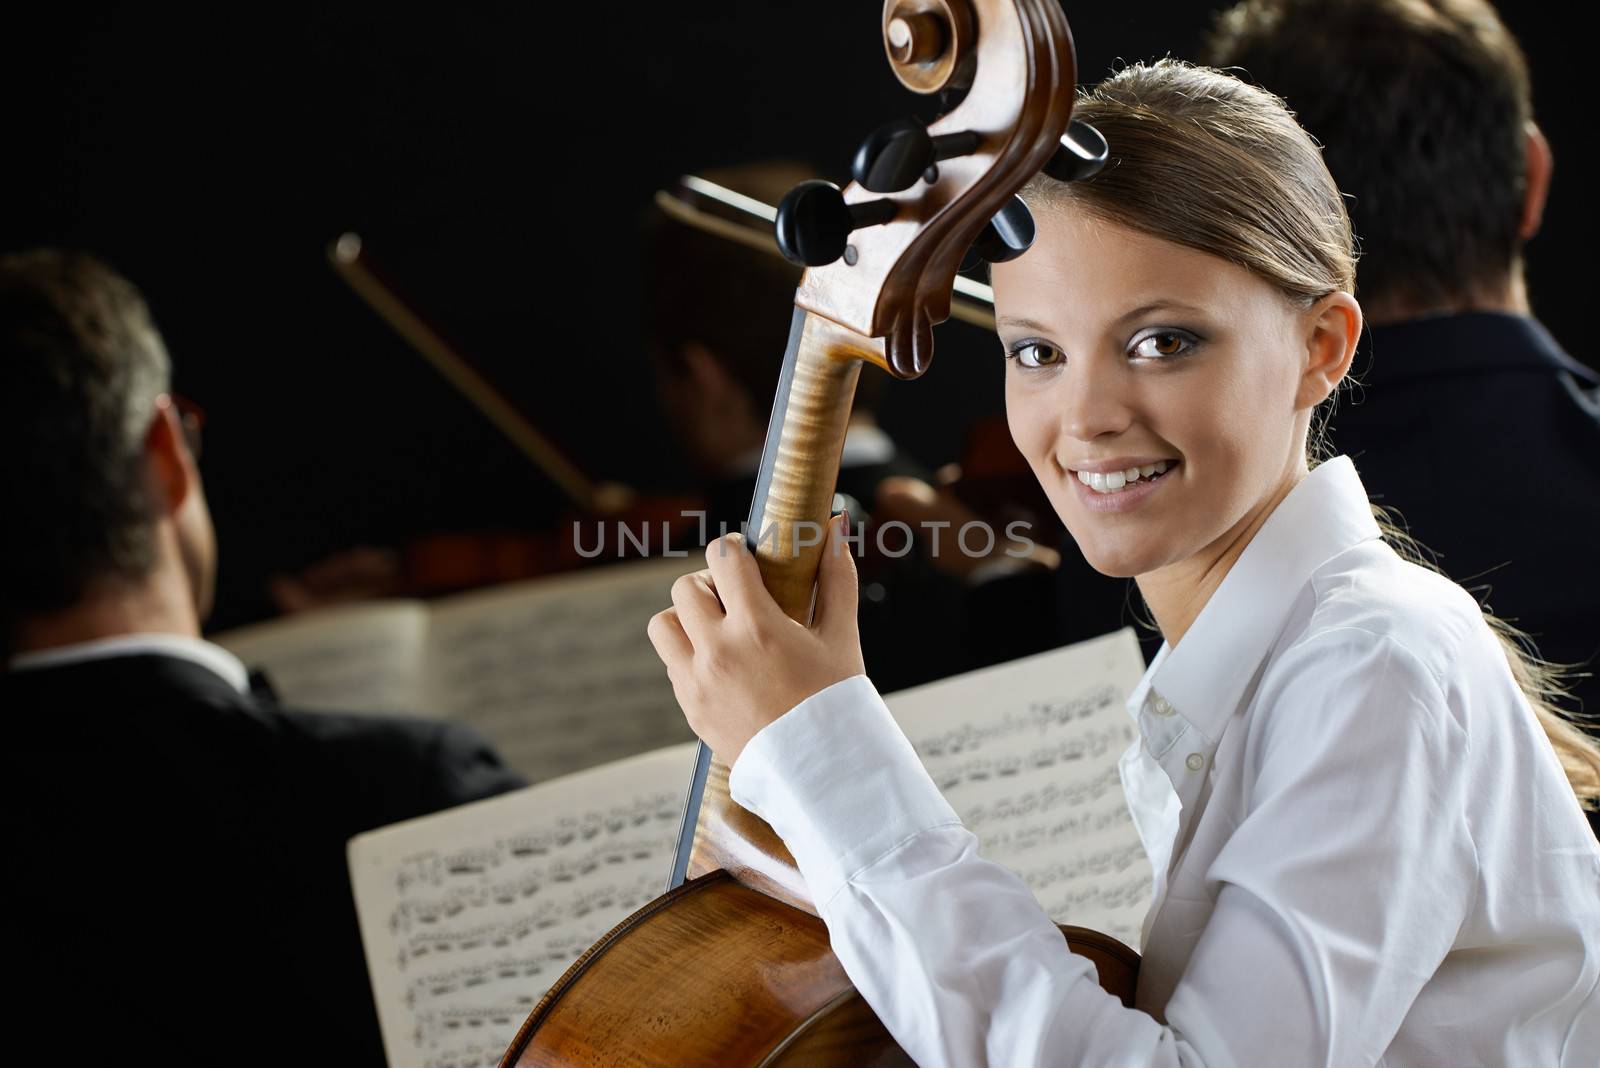 Young beautiful woman playing cello in orchestra